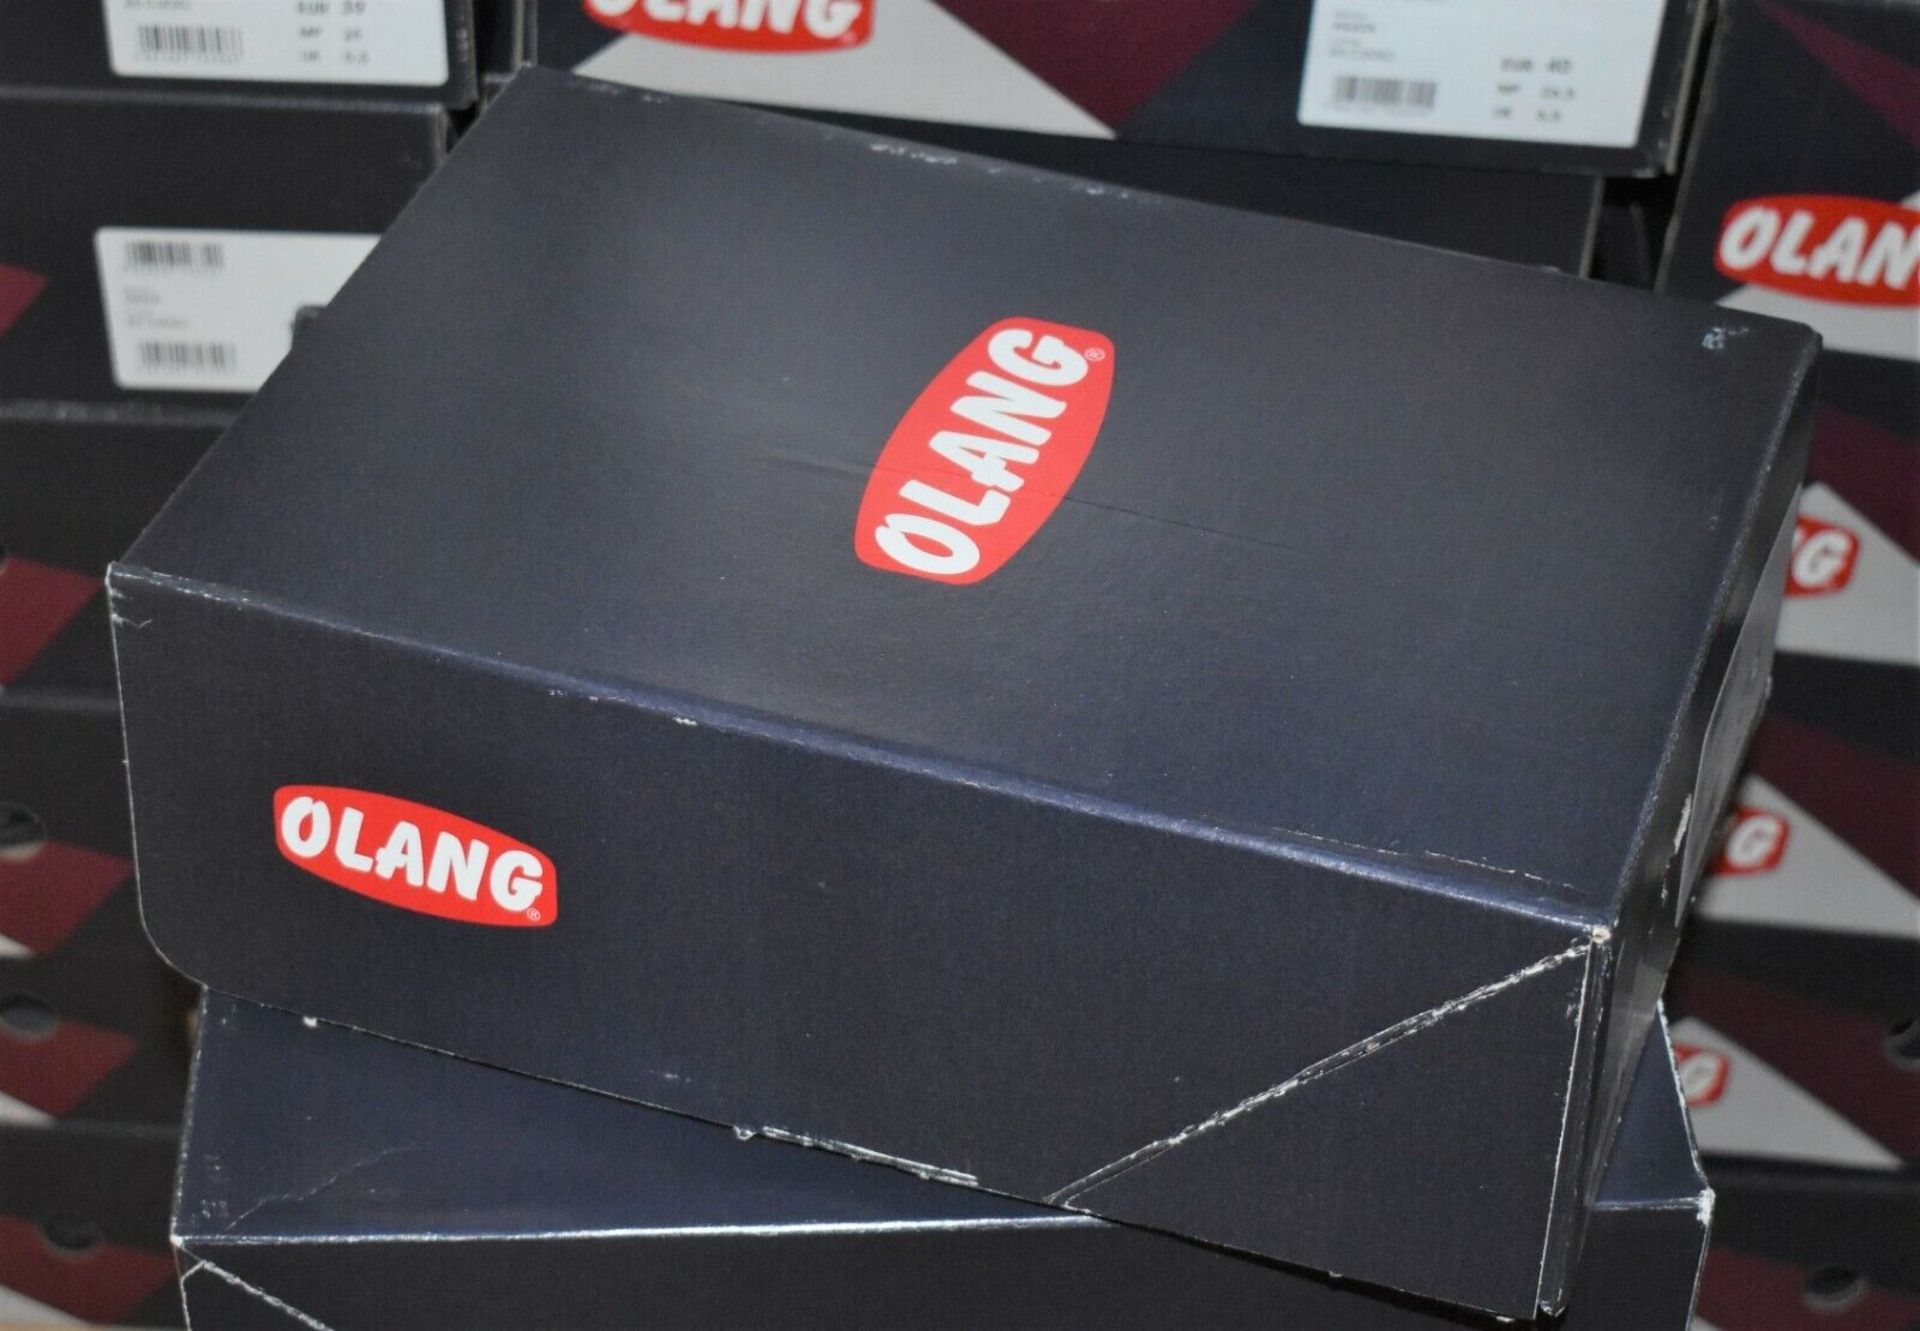 1 x Pair of Designer Olang Women's Winter Boots - Merano.Win.BTX 85 Cuoio - Euro Size 37 - New Boxed - Image 2 of 2